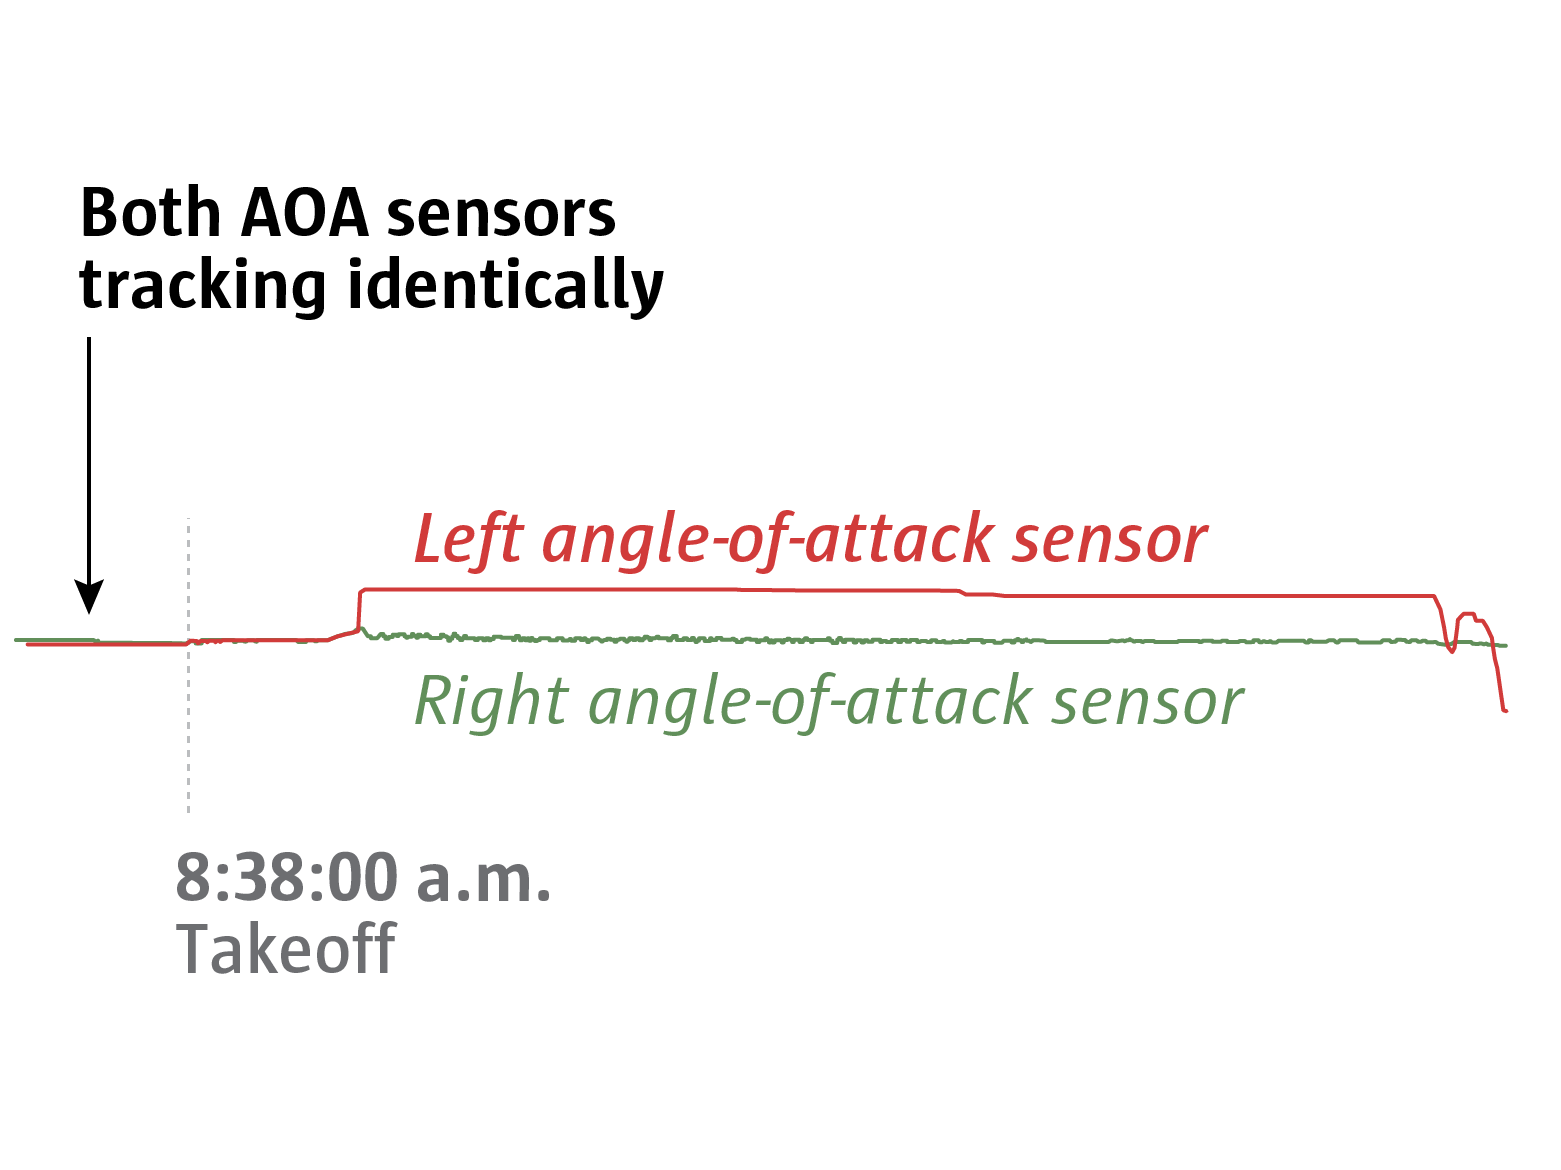 Chart showing disagreement between the left and right angle-of-attack sensors